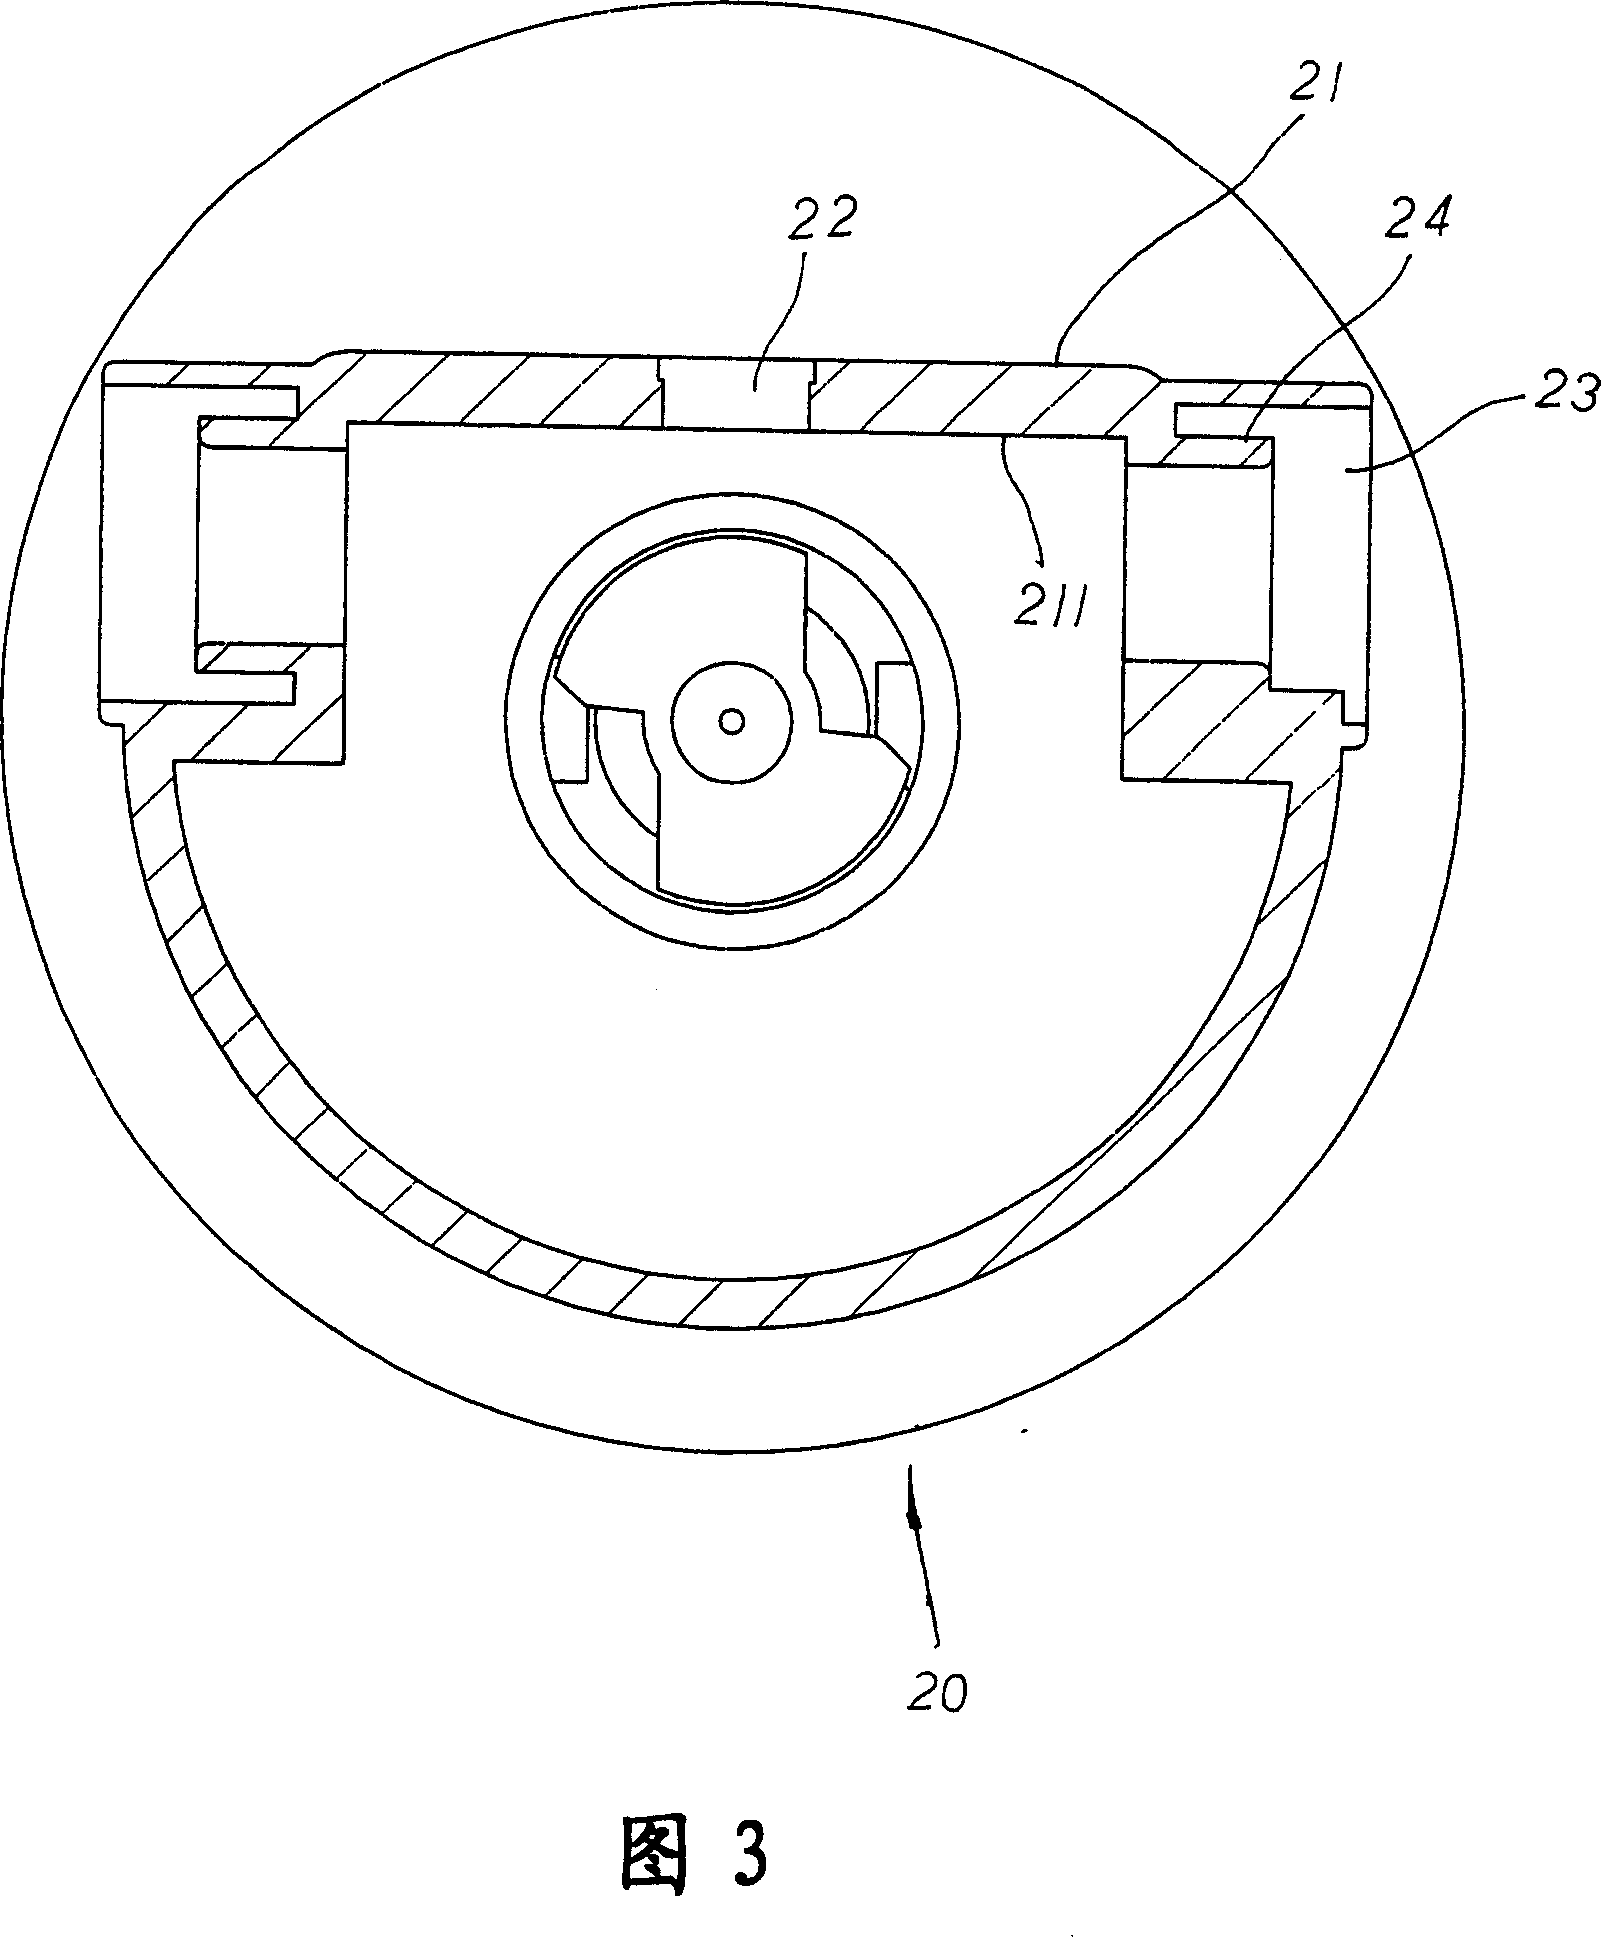 Water stopping and discharging control structure for aspergillum